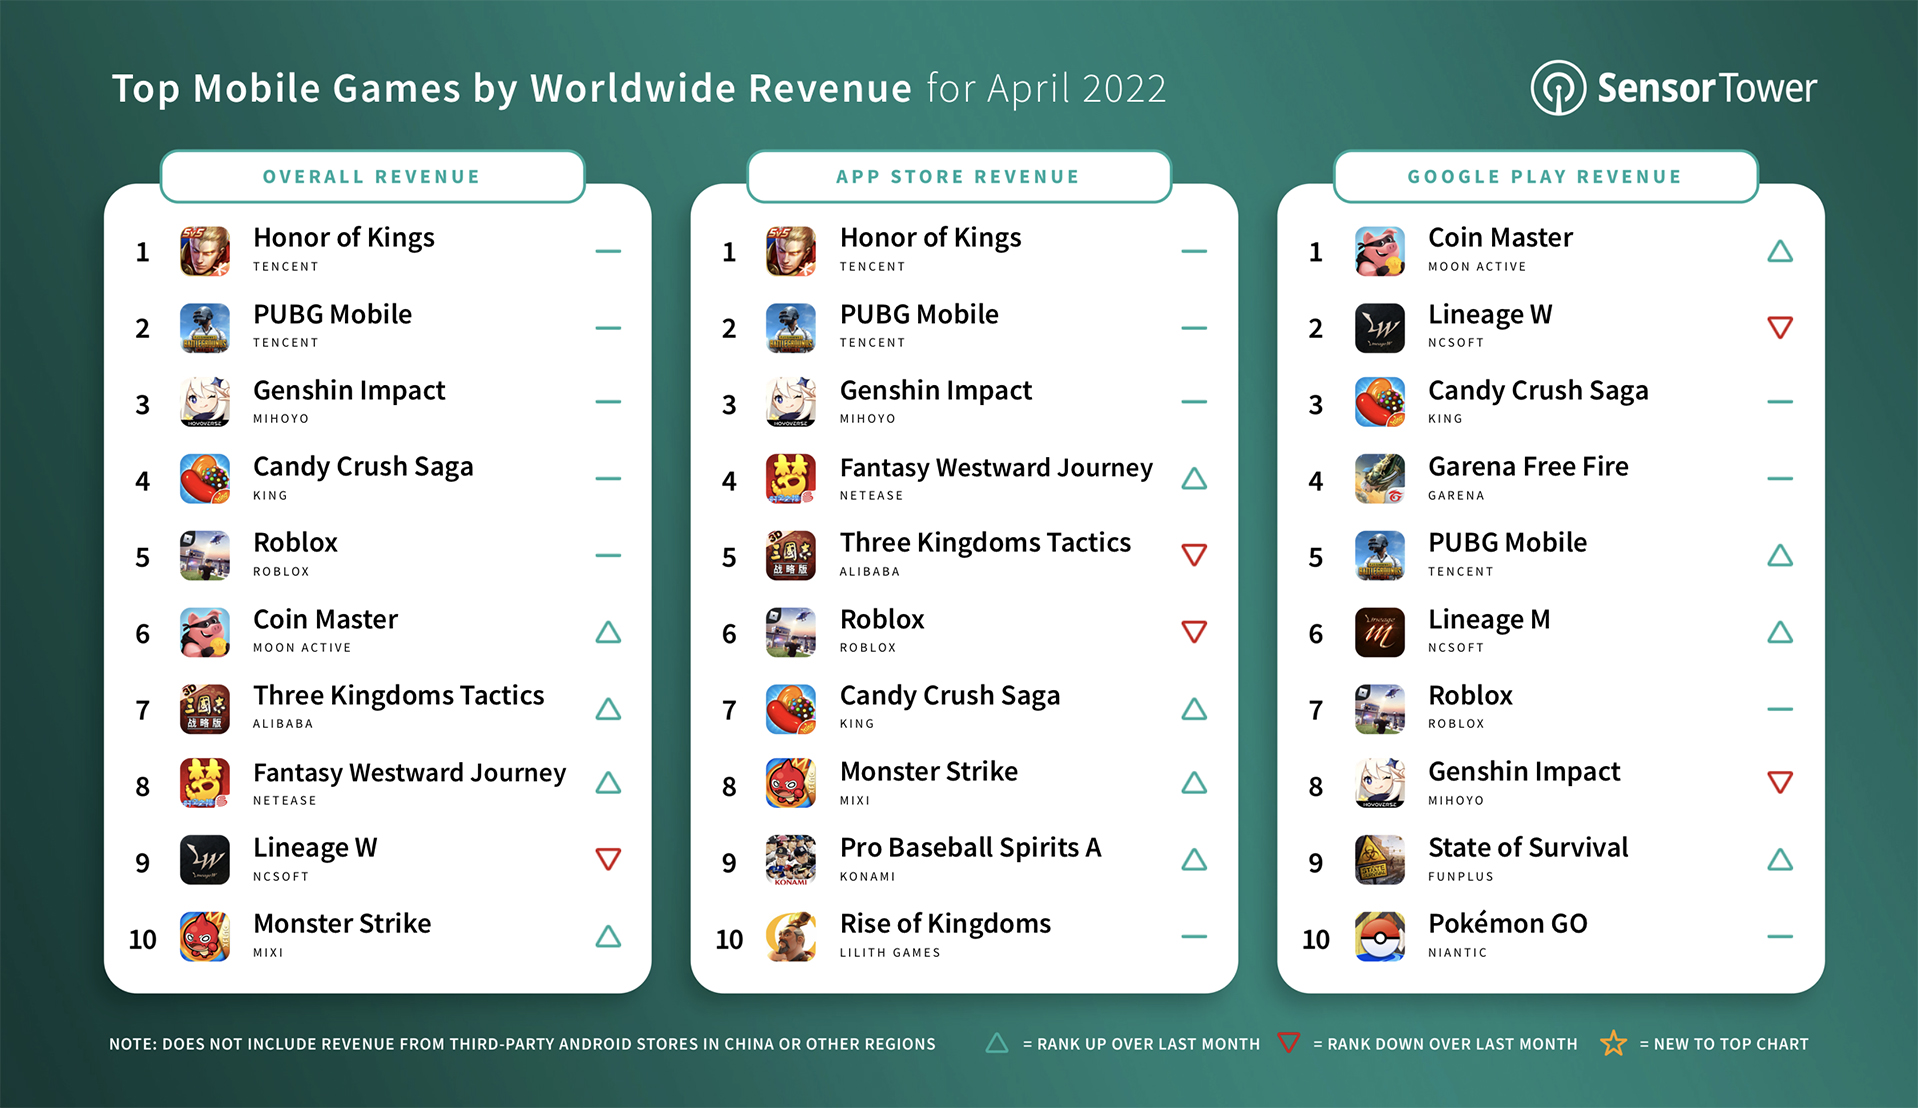 Top Grossing Mobile Games Worldwide for April 2022